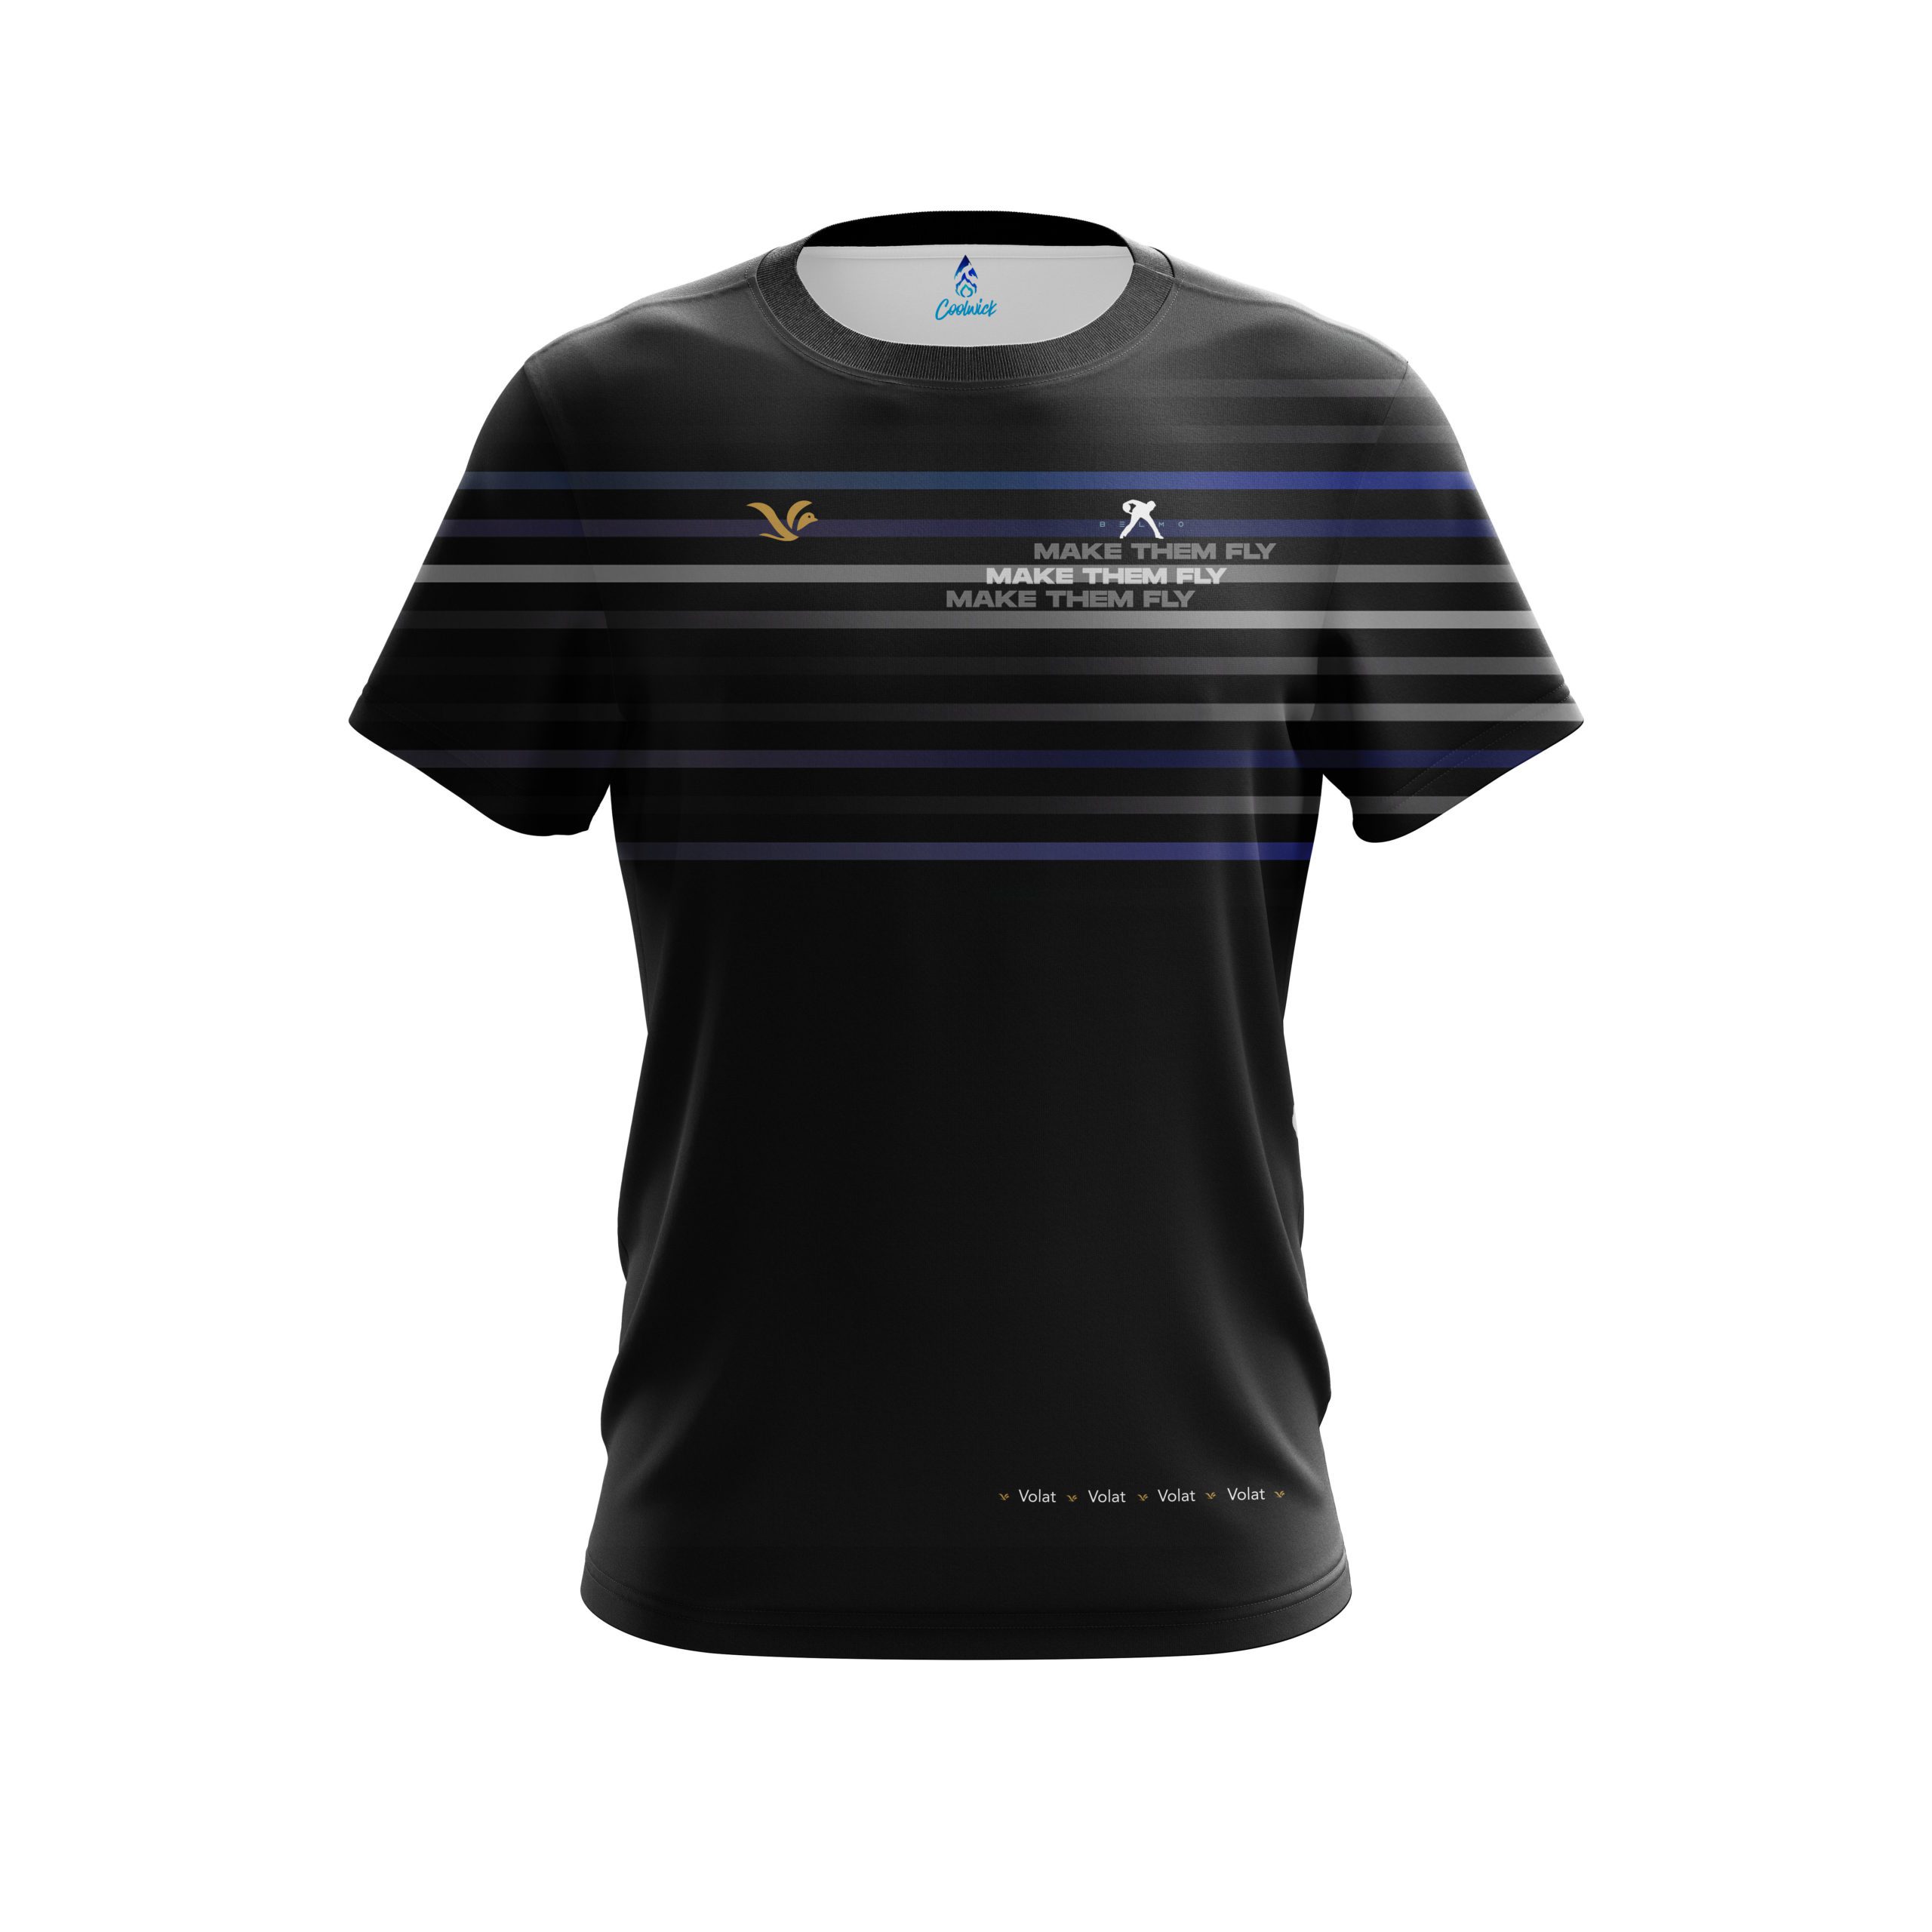 Belmo Belmo Make Them Fly Bowling Jersey - Volat Athletics by Coolwick